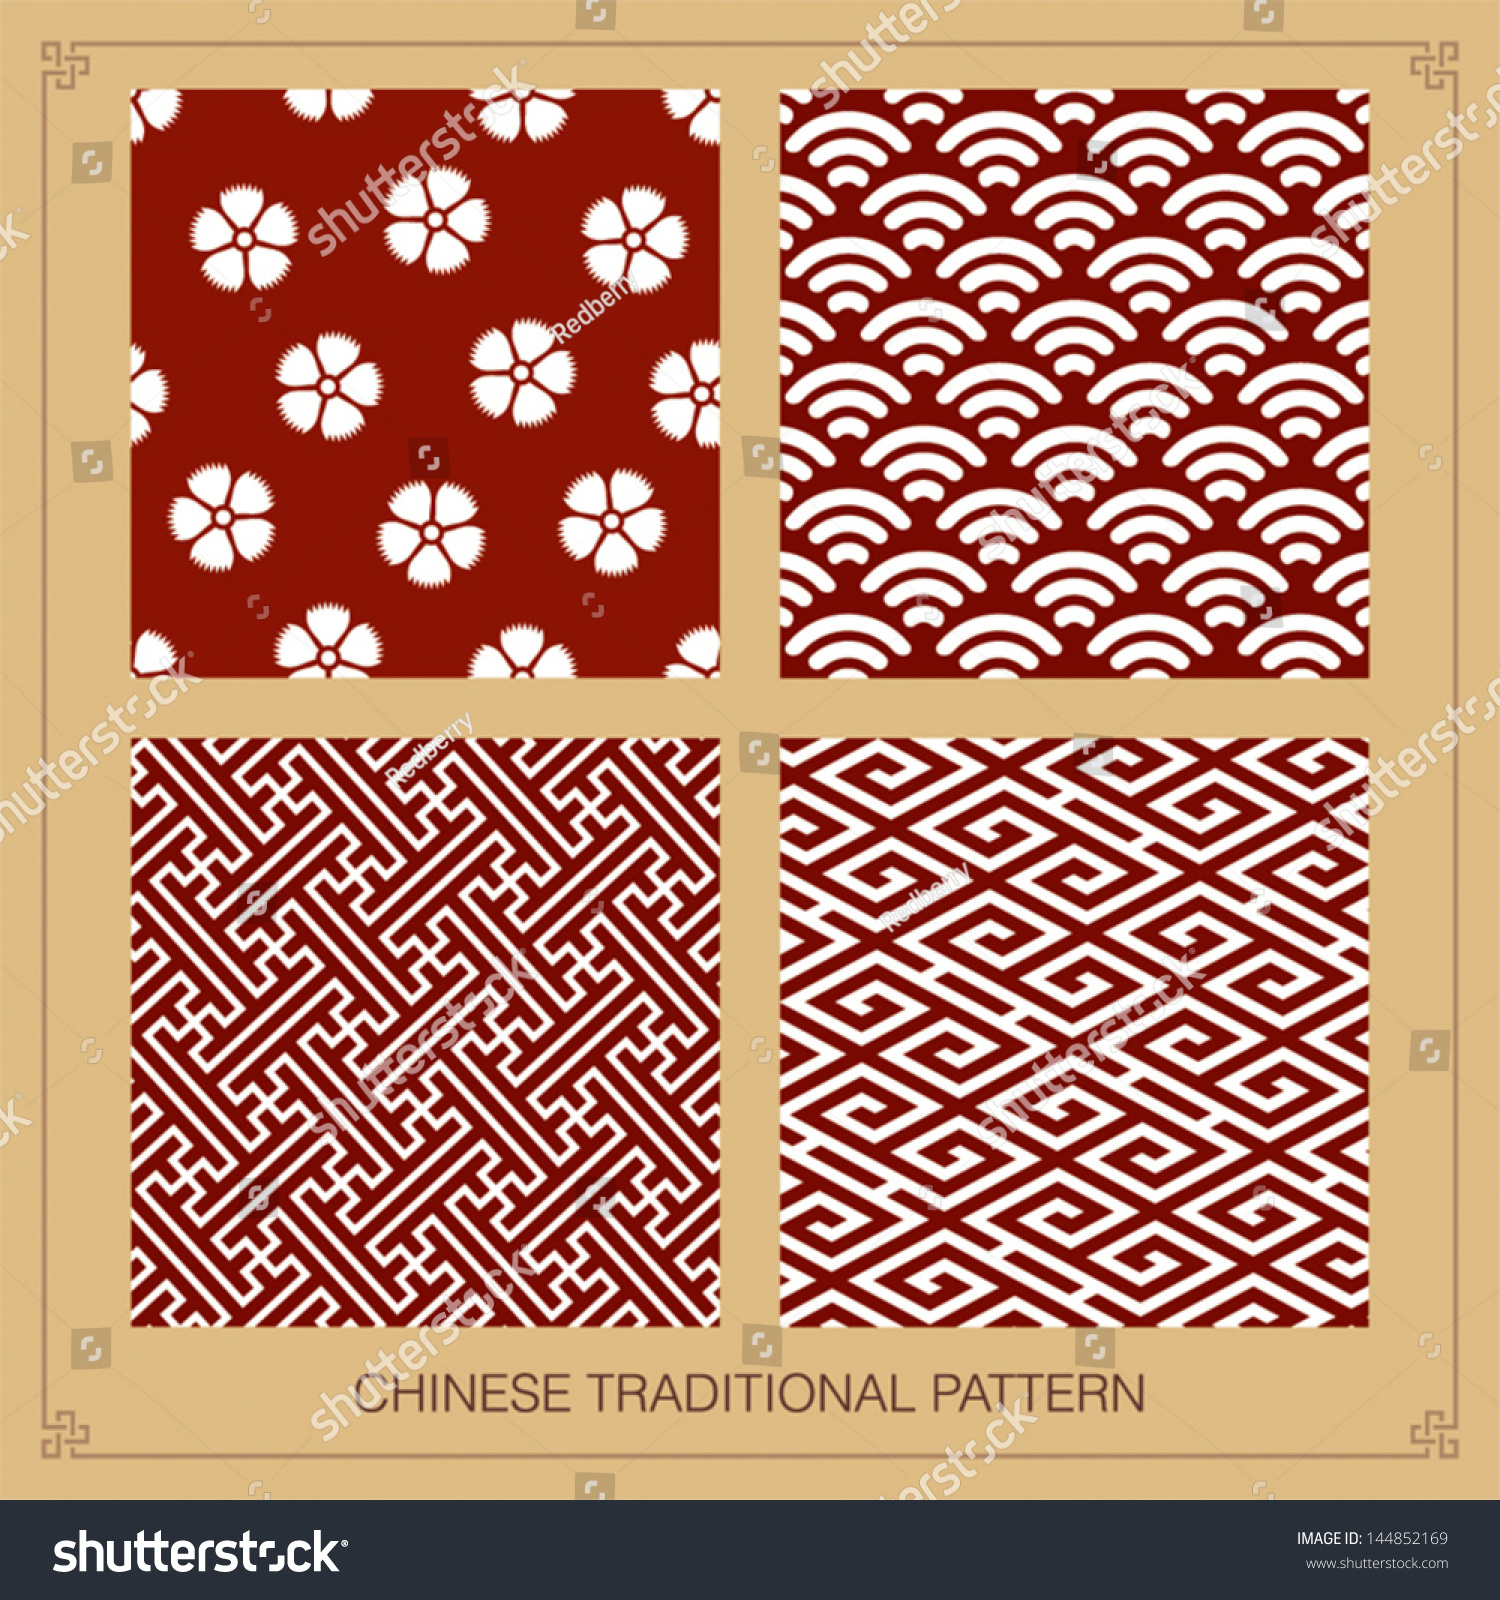 Chinese Traditional Pattern Motif Stock Vector 144852169 - Shutterstock